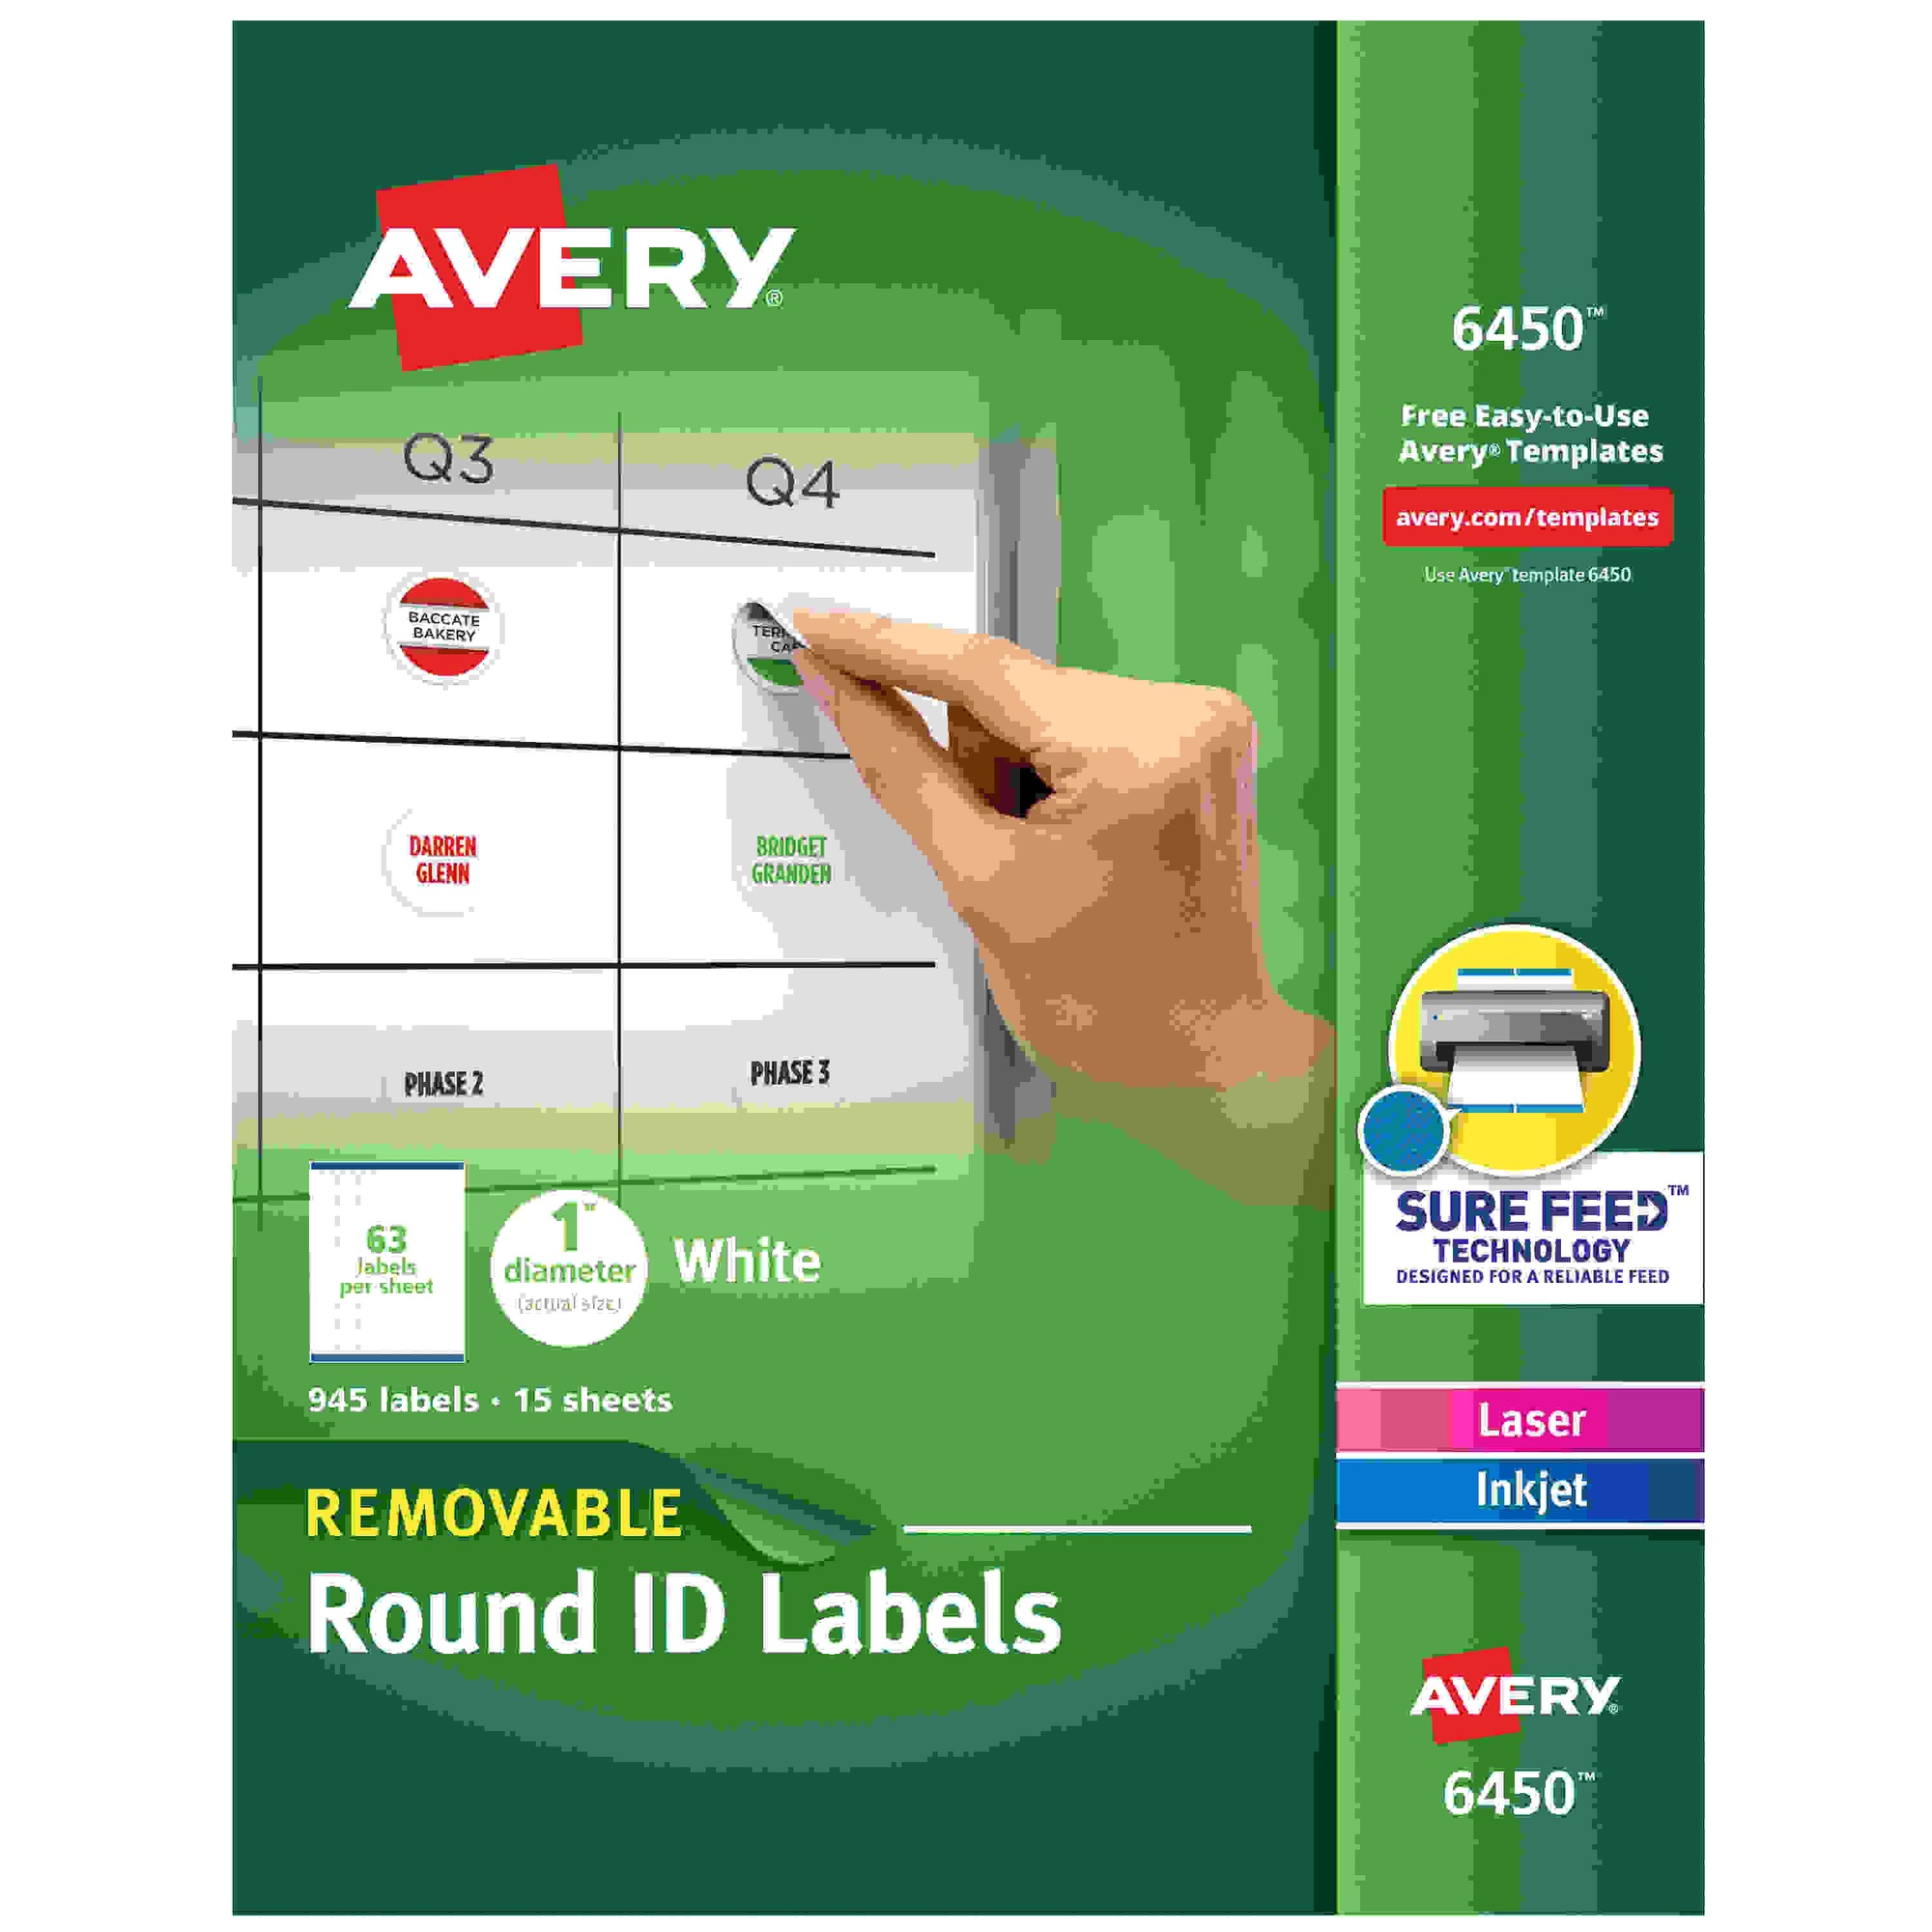 Avery Multiuse Removable Labels - 1" Diameter - Removable Adhesive - Round - Laser, Inkjet - White - Paper - 63 / Sheet - 1